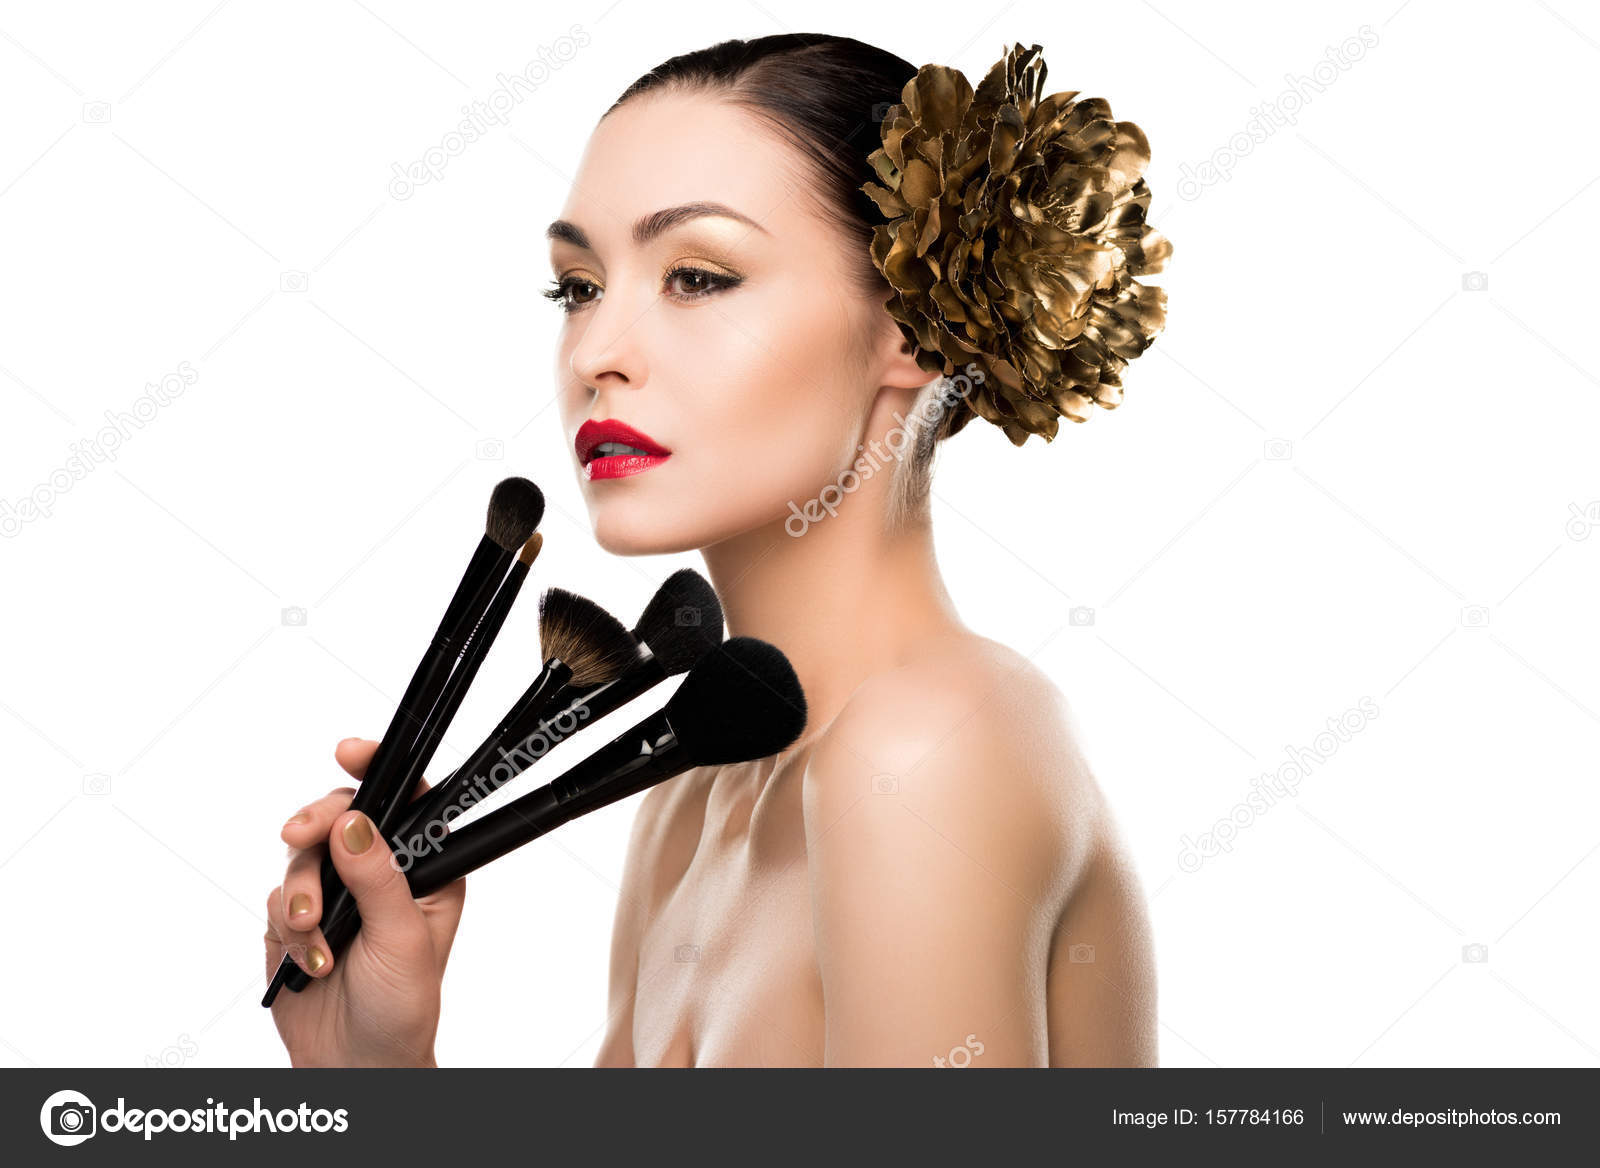 Woman Holding Makeup Brushes — Stock Photo © Dmitrypoch 157784166